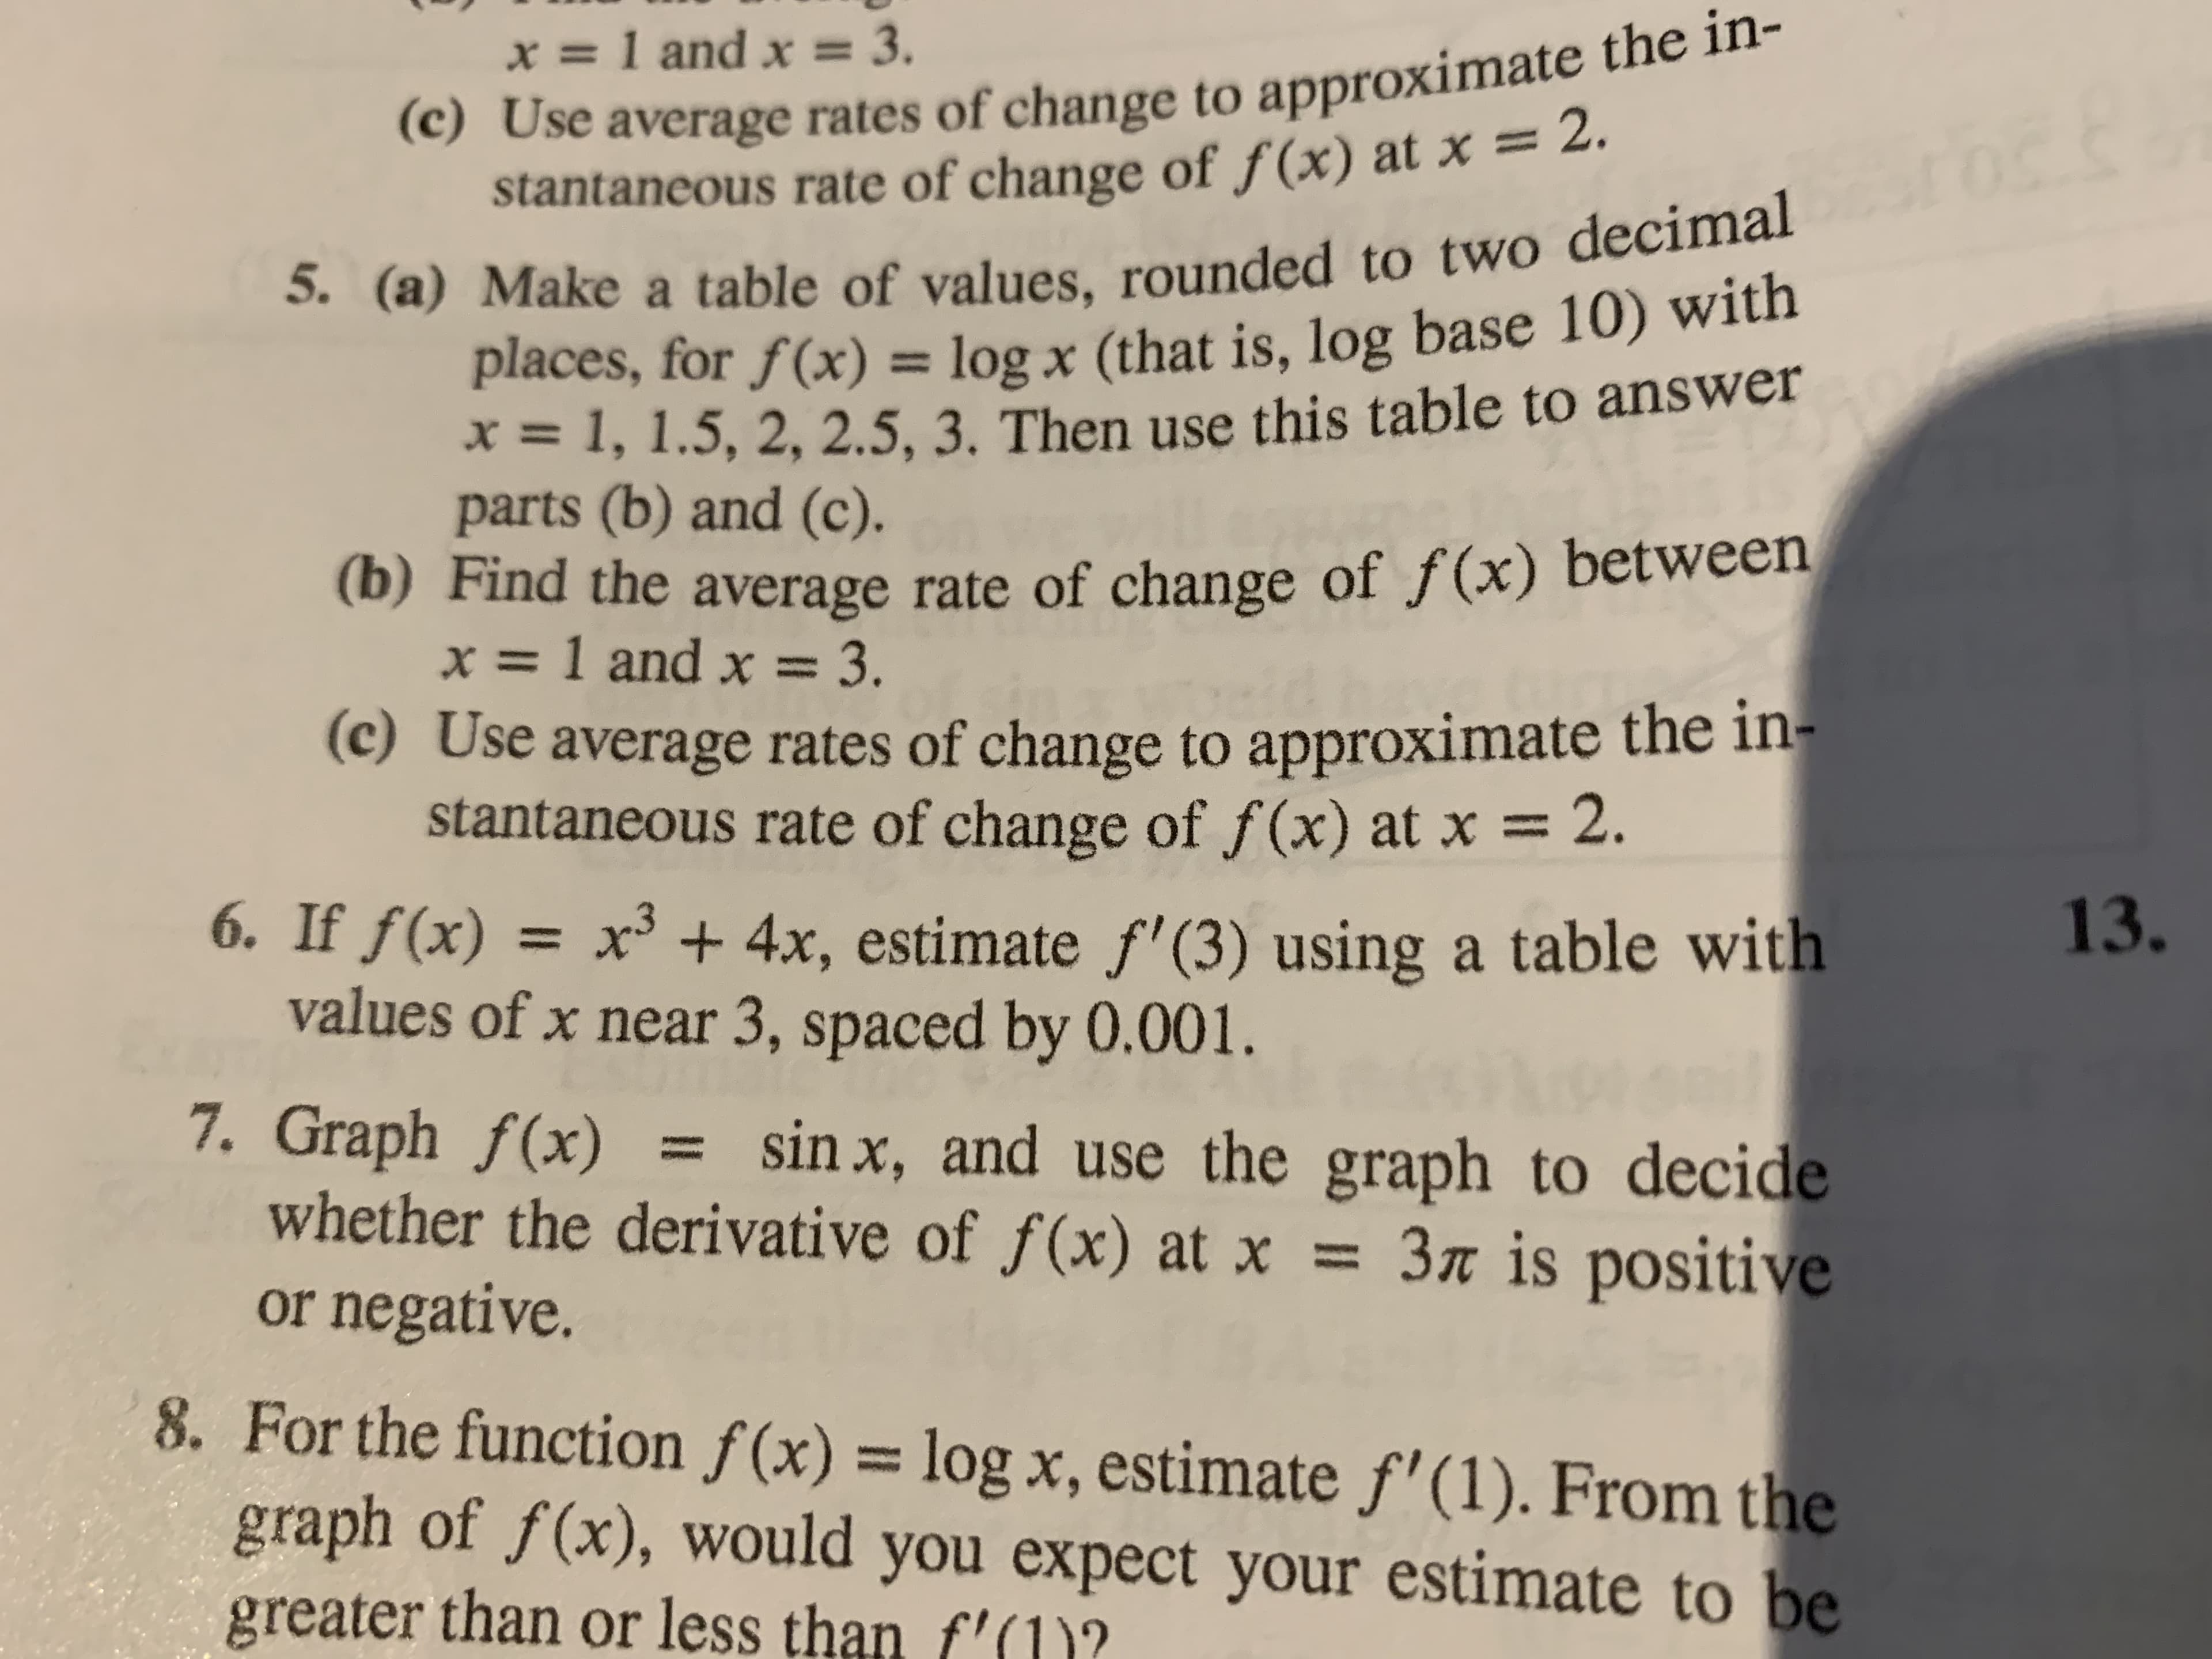 (c) Use average rates of change to approximate the in-
stantaneous rate of change of f(x) at x = 2.
5. (a) Make a table of values, rounded to two decimal
places, for f(x) = log x (that is, log base 10) with
=1, 1.5, 2, 2.5, 3. Then use this table to answer
parts (b) and (c).
(b) Find the average rate of change of f(x) between
=1 and x 3.
(c) Use average rates of change to approximate the in-
stantaneous rate of change of f (x) at x
x=1 and x = 3.
2.
6. If f(x) = x3 4x, estimate f' (3) using a table with
values of x near 3, spaced by 0.001.
7. Graph f(x)
whether the derivative of f(x) at x = 3« is positive
or negative.
13.
sin x, and use the graph to decide
8. For the function f(x) = log x, estimate f'(1). From the
graph of f(x), would you expect your estimate to be
greater than or less than f'(1)?
